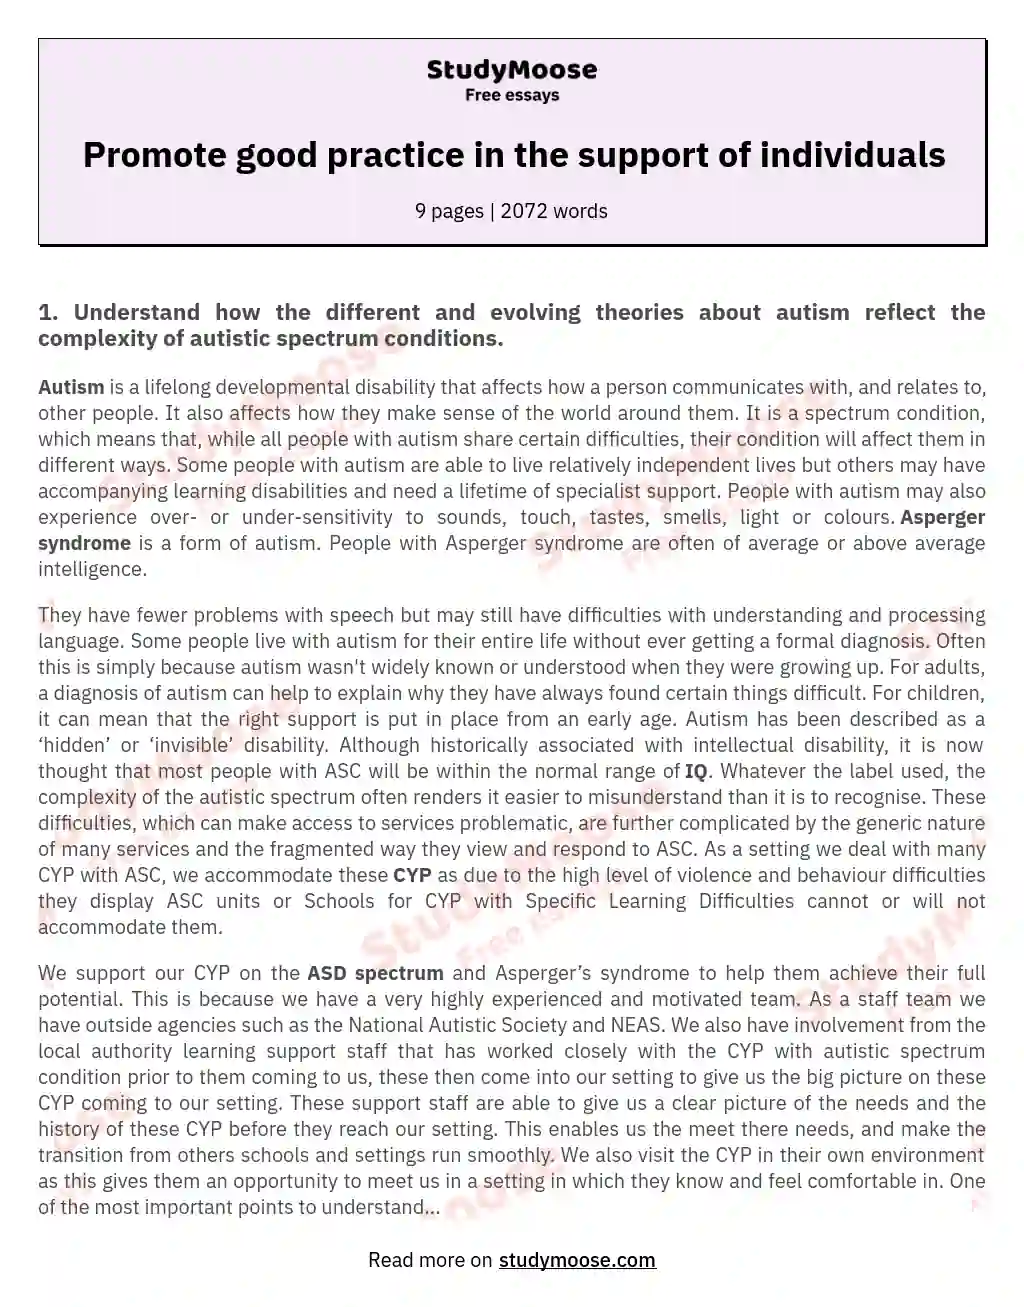 Promote good practice in the support of individuals